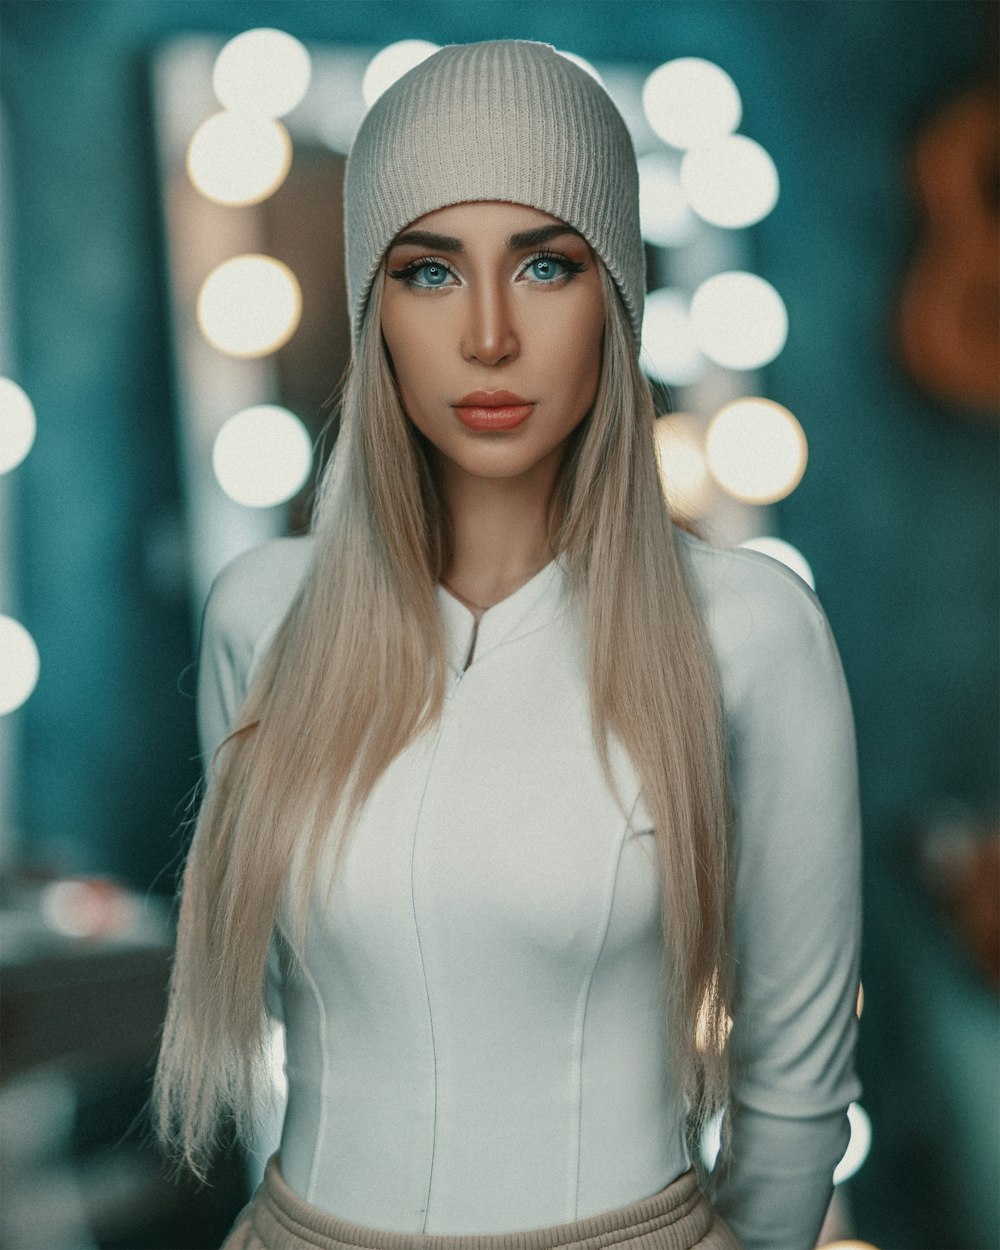 woman in white knit cap and white long sleeve shirt